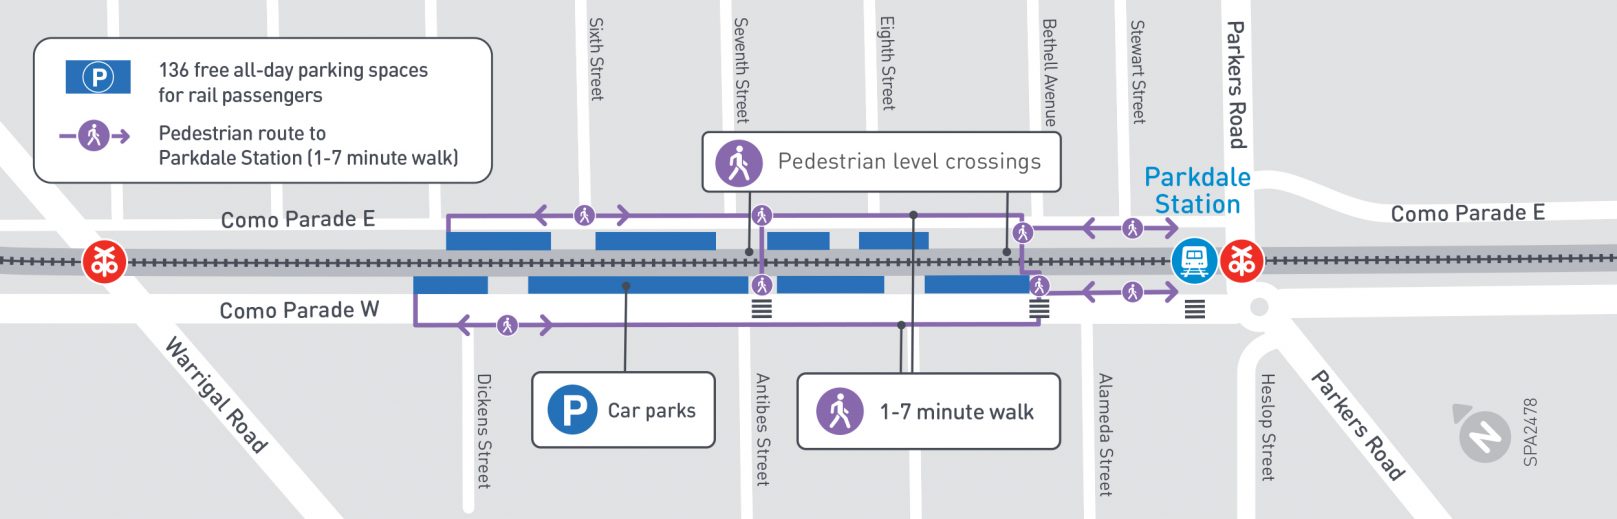 Alternative parking at Parkland Station - click to view larger version of map